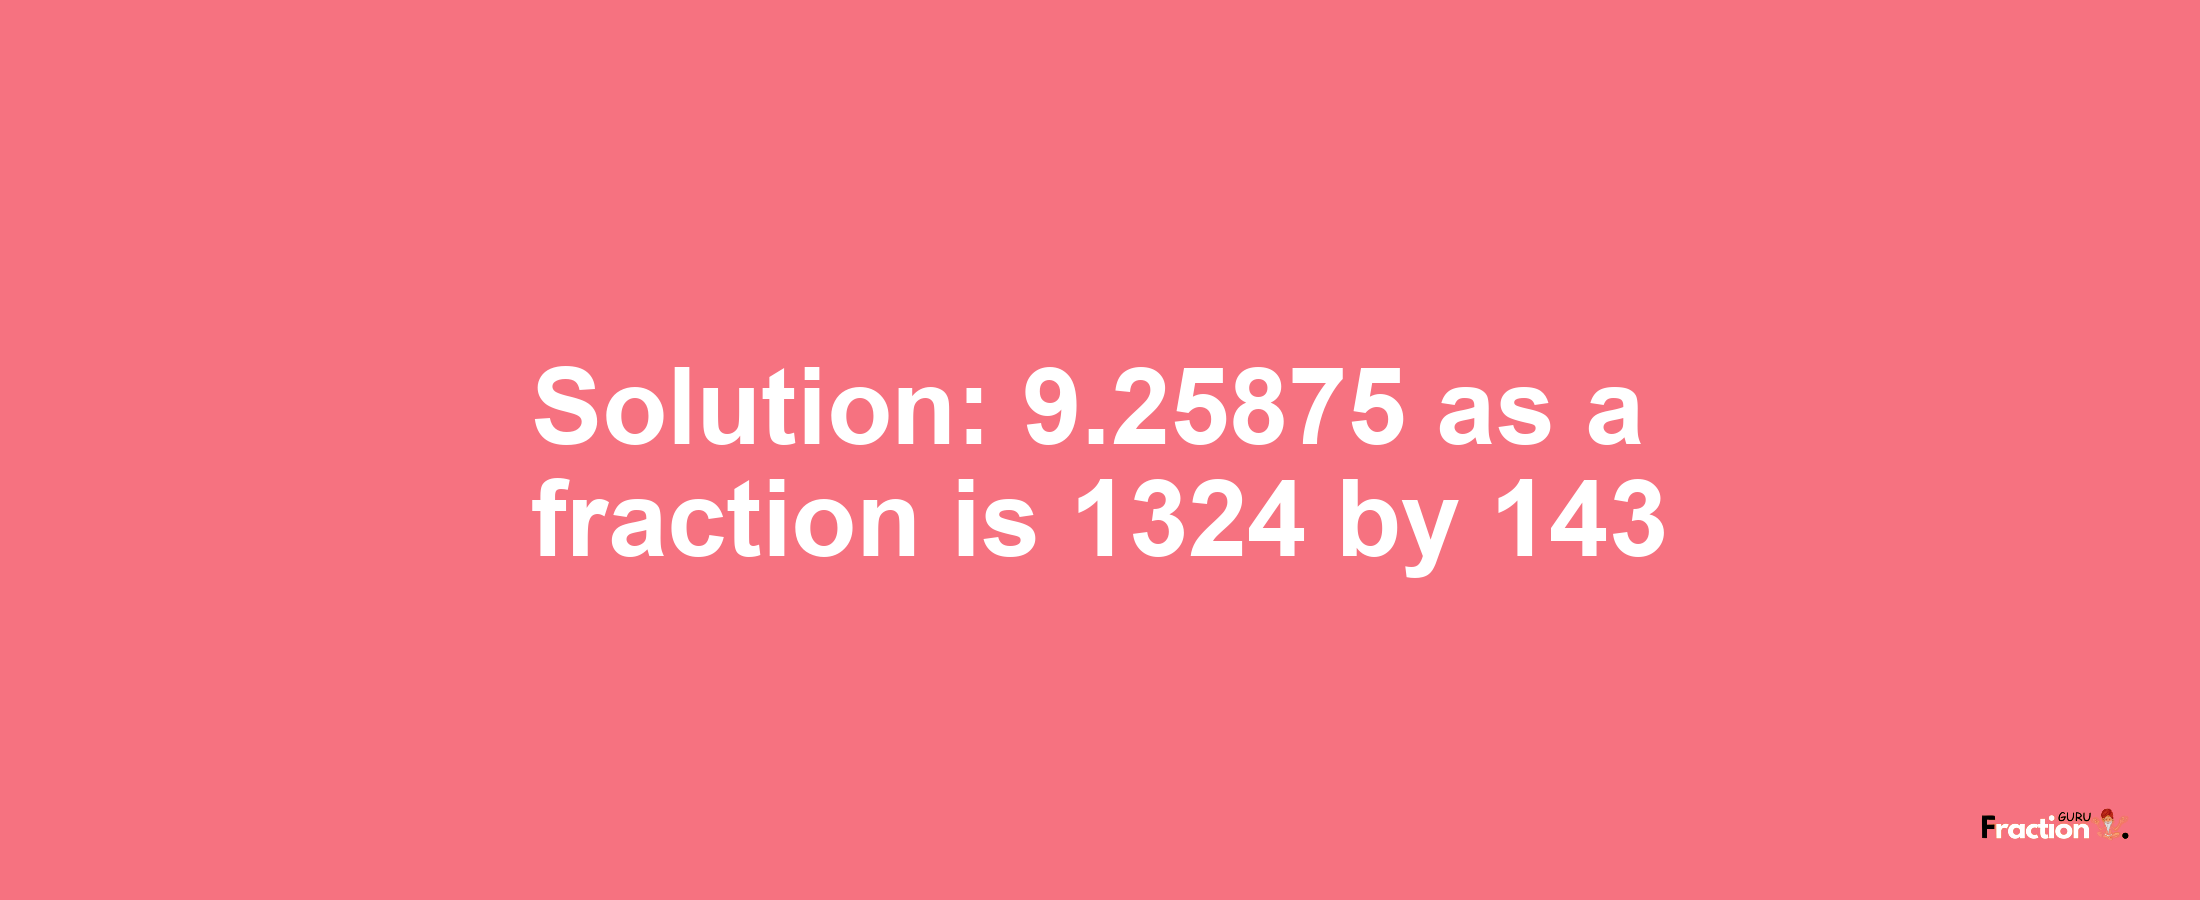 Solution:9.25875 as a fraction is 1324/143